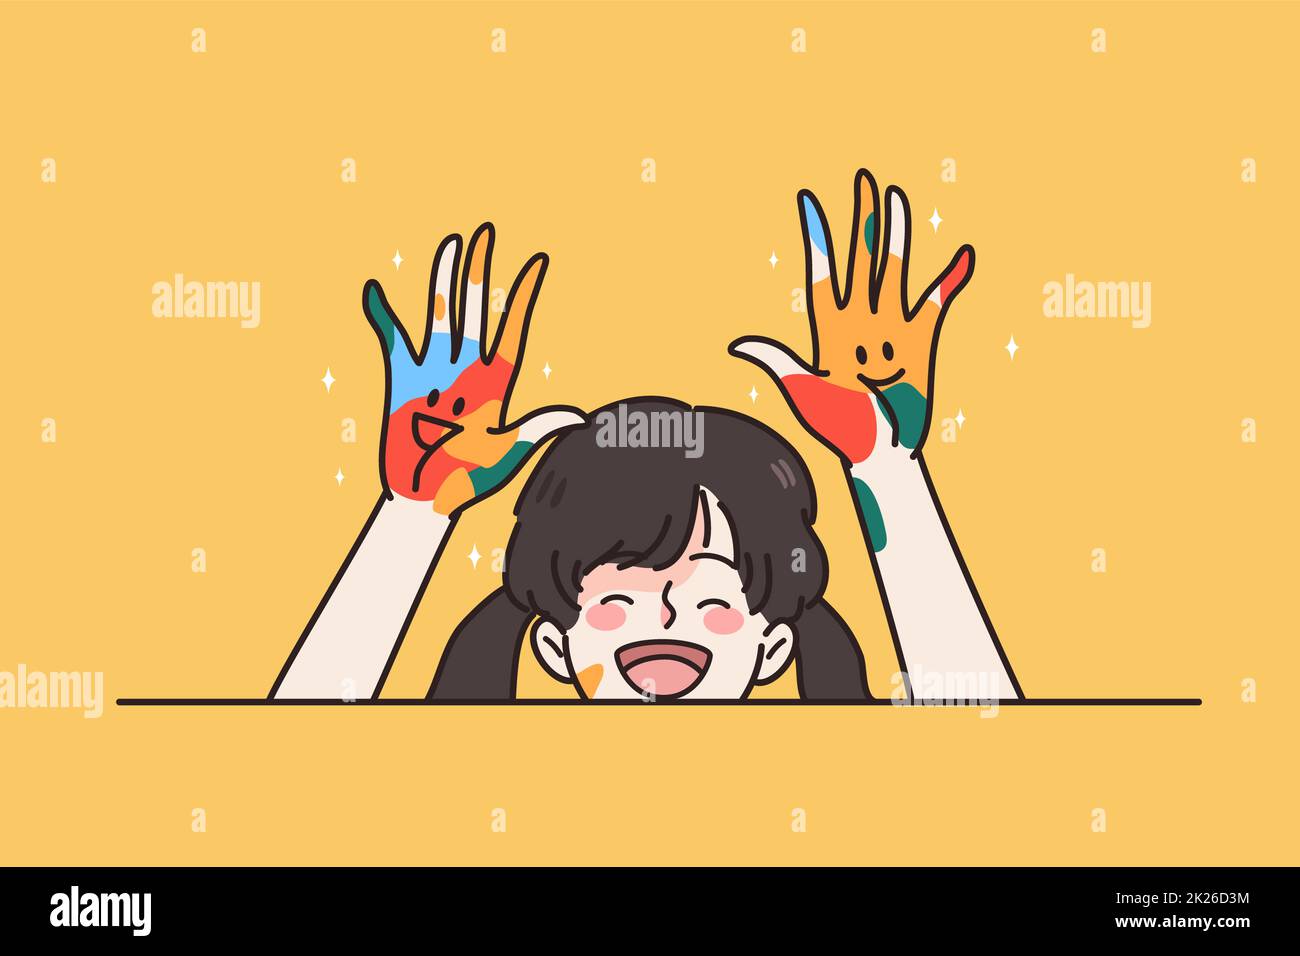 Smiling girl child with colorful hands from paint Stock Photo